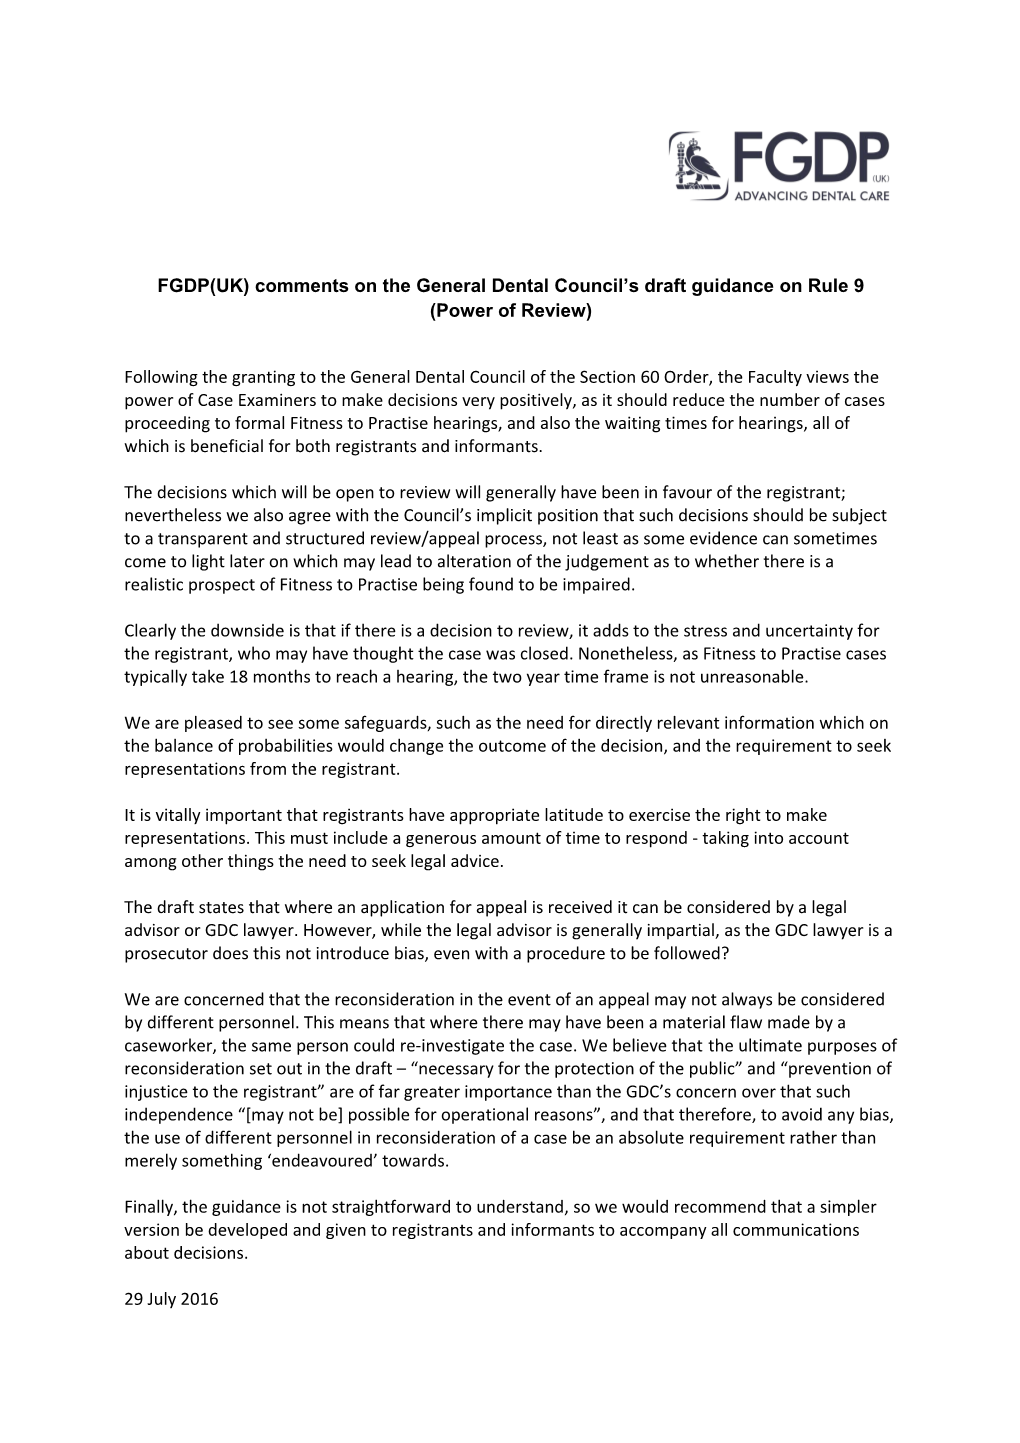 FGDP(UK) Comments on the General Dental Council S Draft Guidance on Rule 9 (Power of Review)